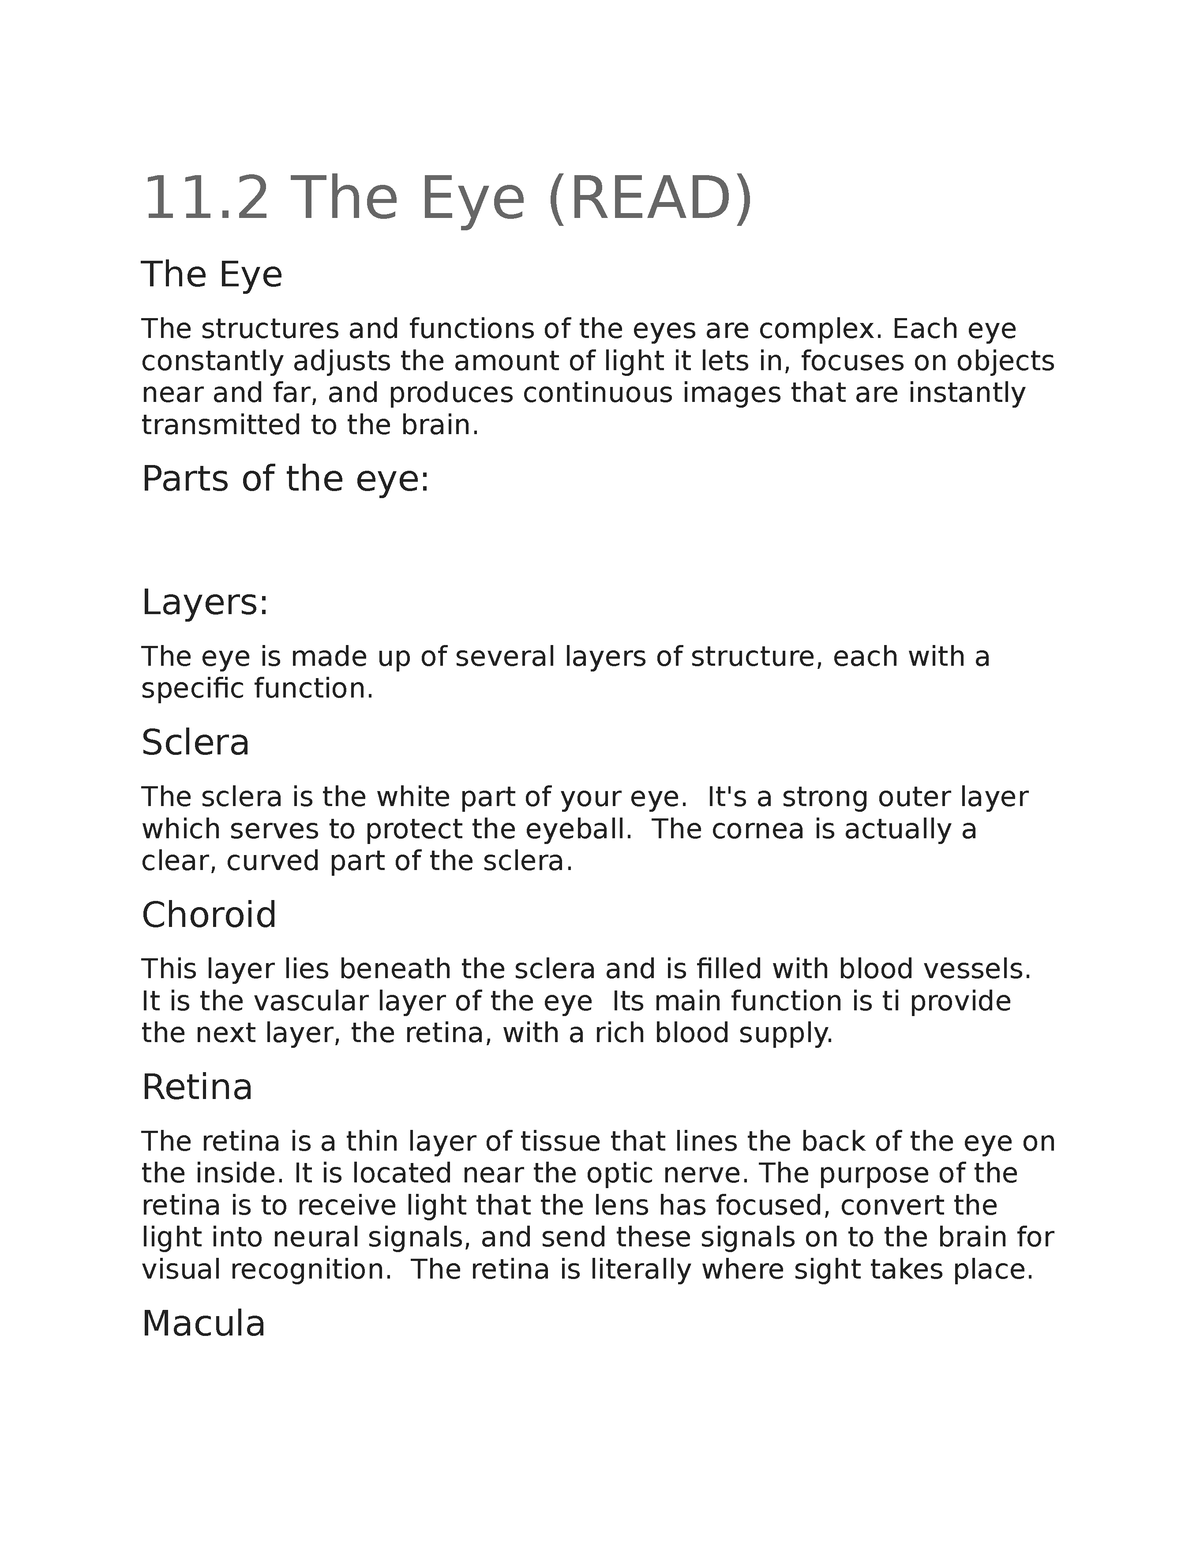 quiz-11-info-exam-notes-11-the-eye-read-the-eye-the-structures-and-functions-of-the-eyes